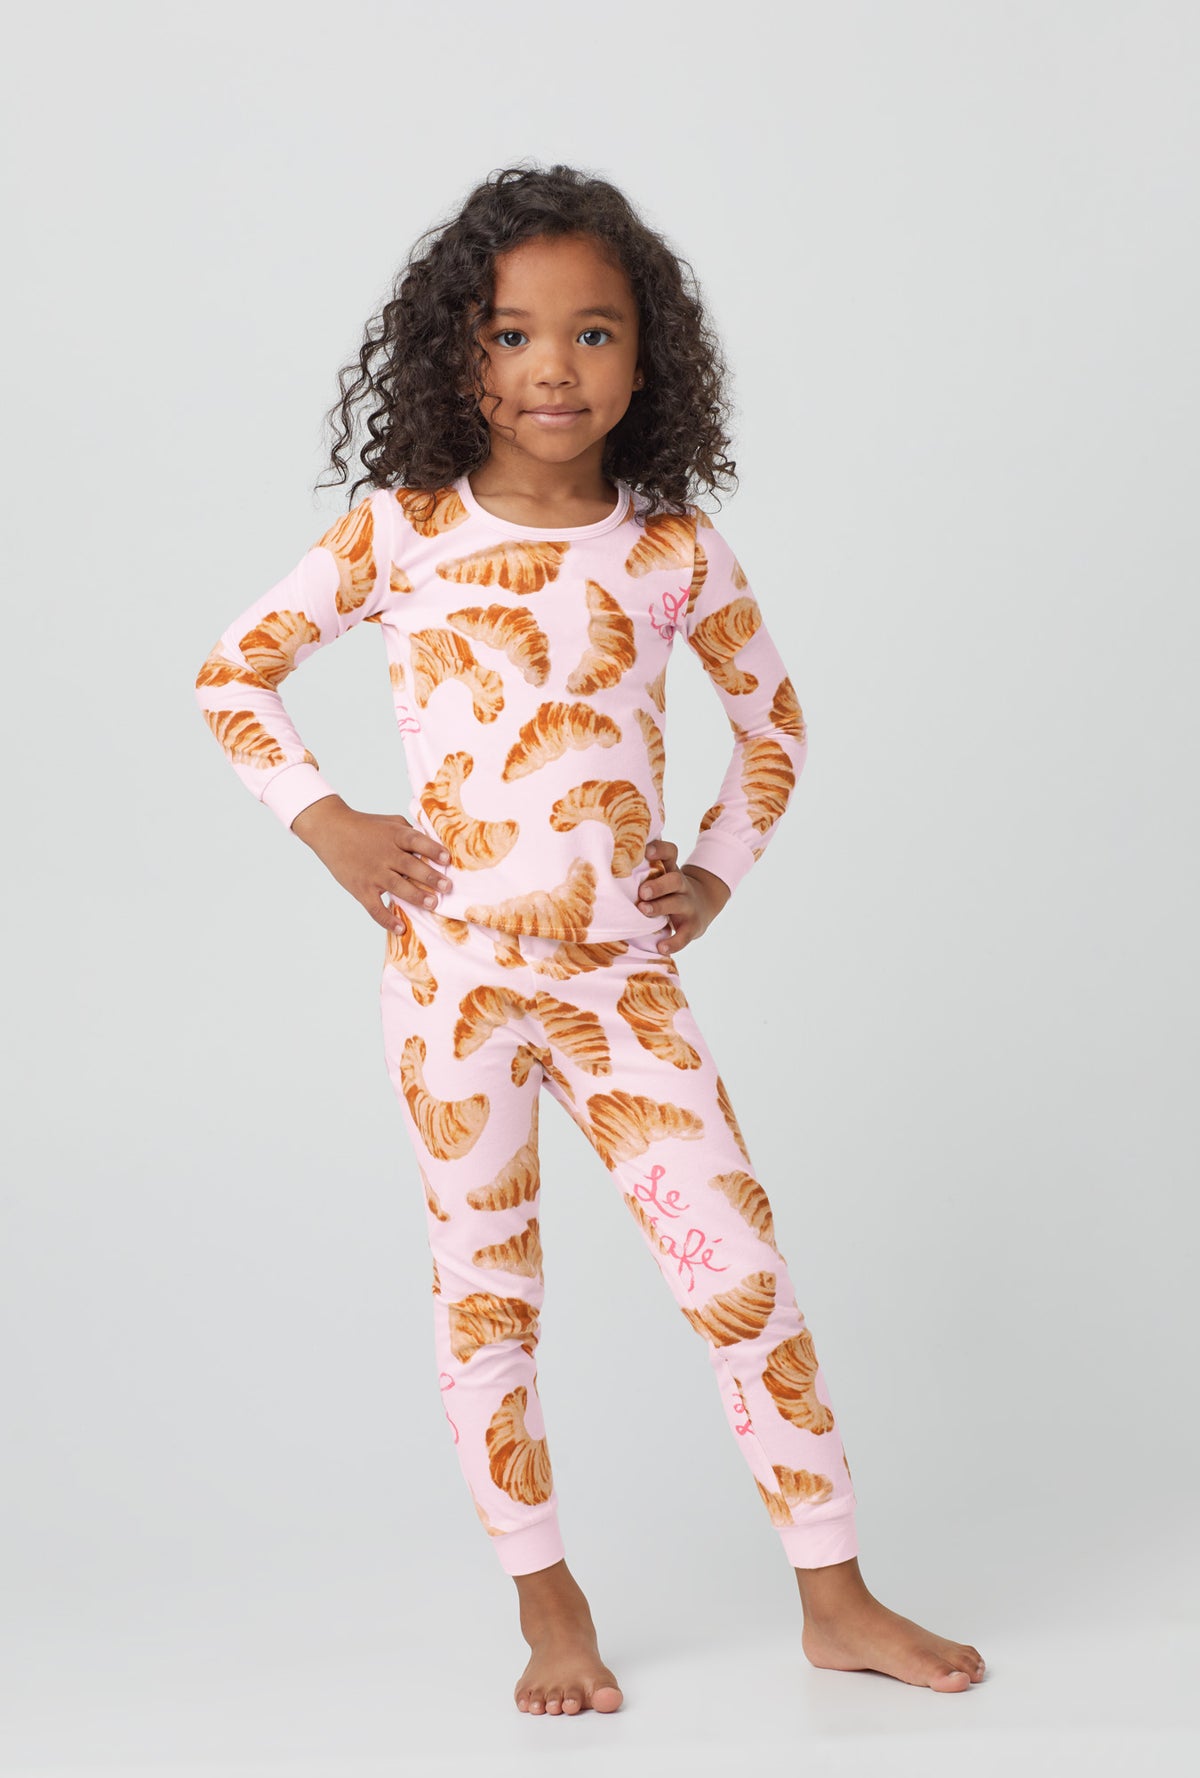 A girl wearing orange  Long Sleeve Stretch Jersey Kids PJ Set  with Le Cafe  print.